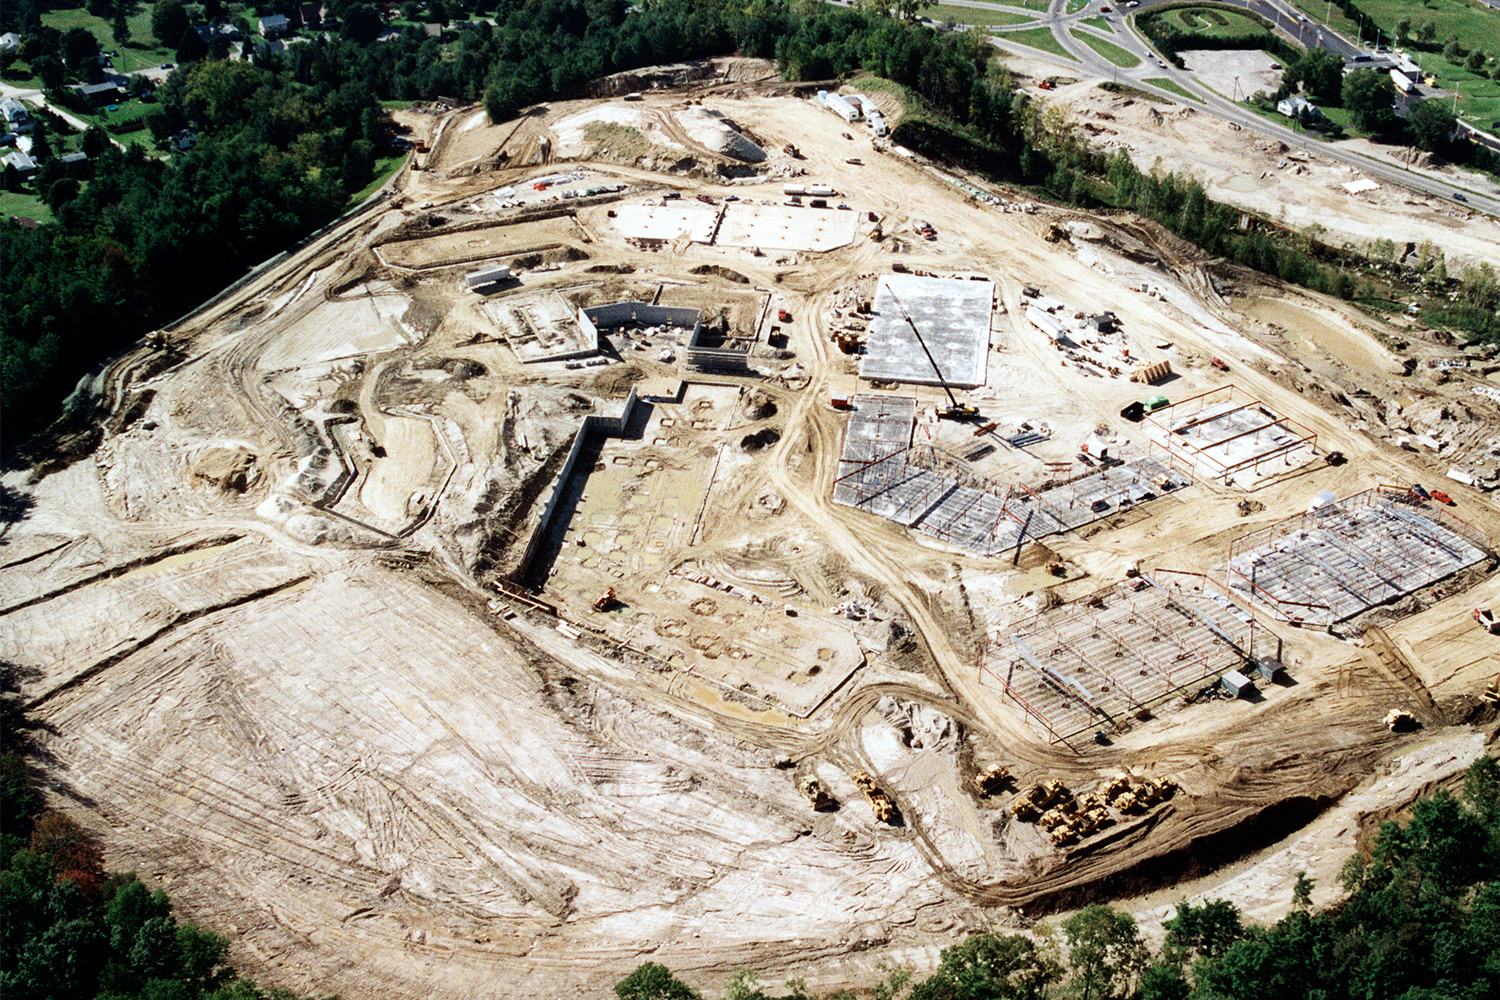 View of Berkshire Outlet's progress in construction, as seen from a drone  